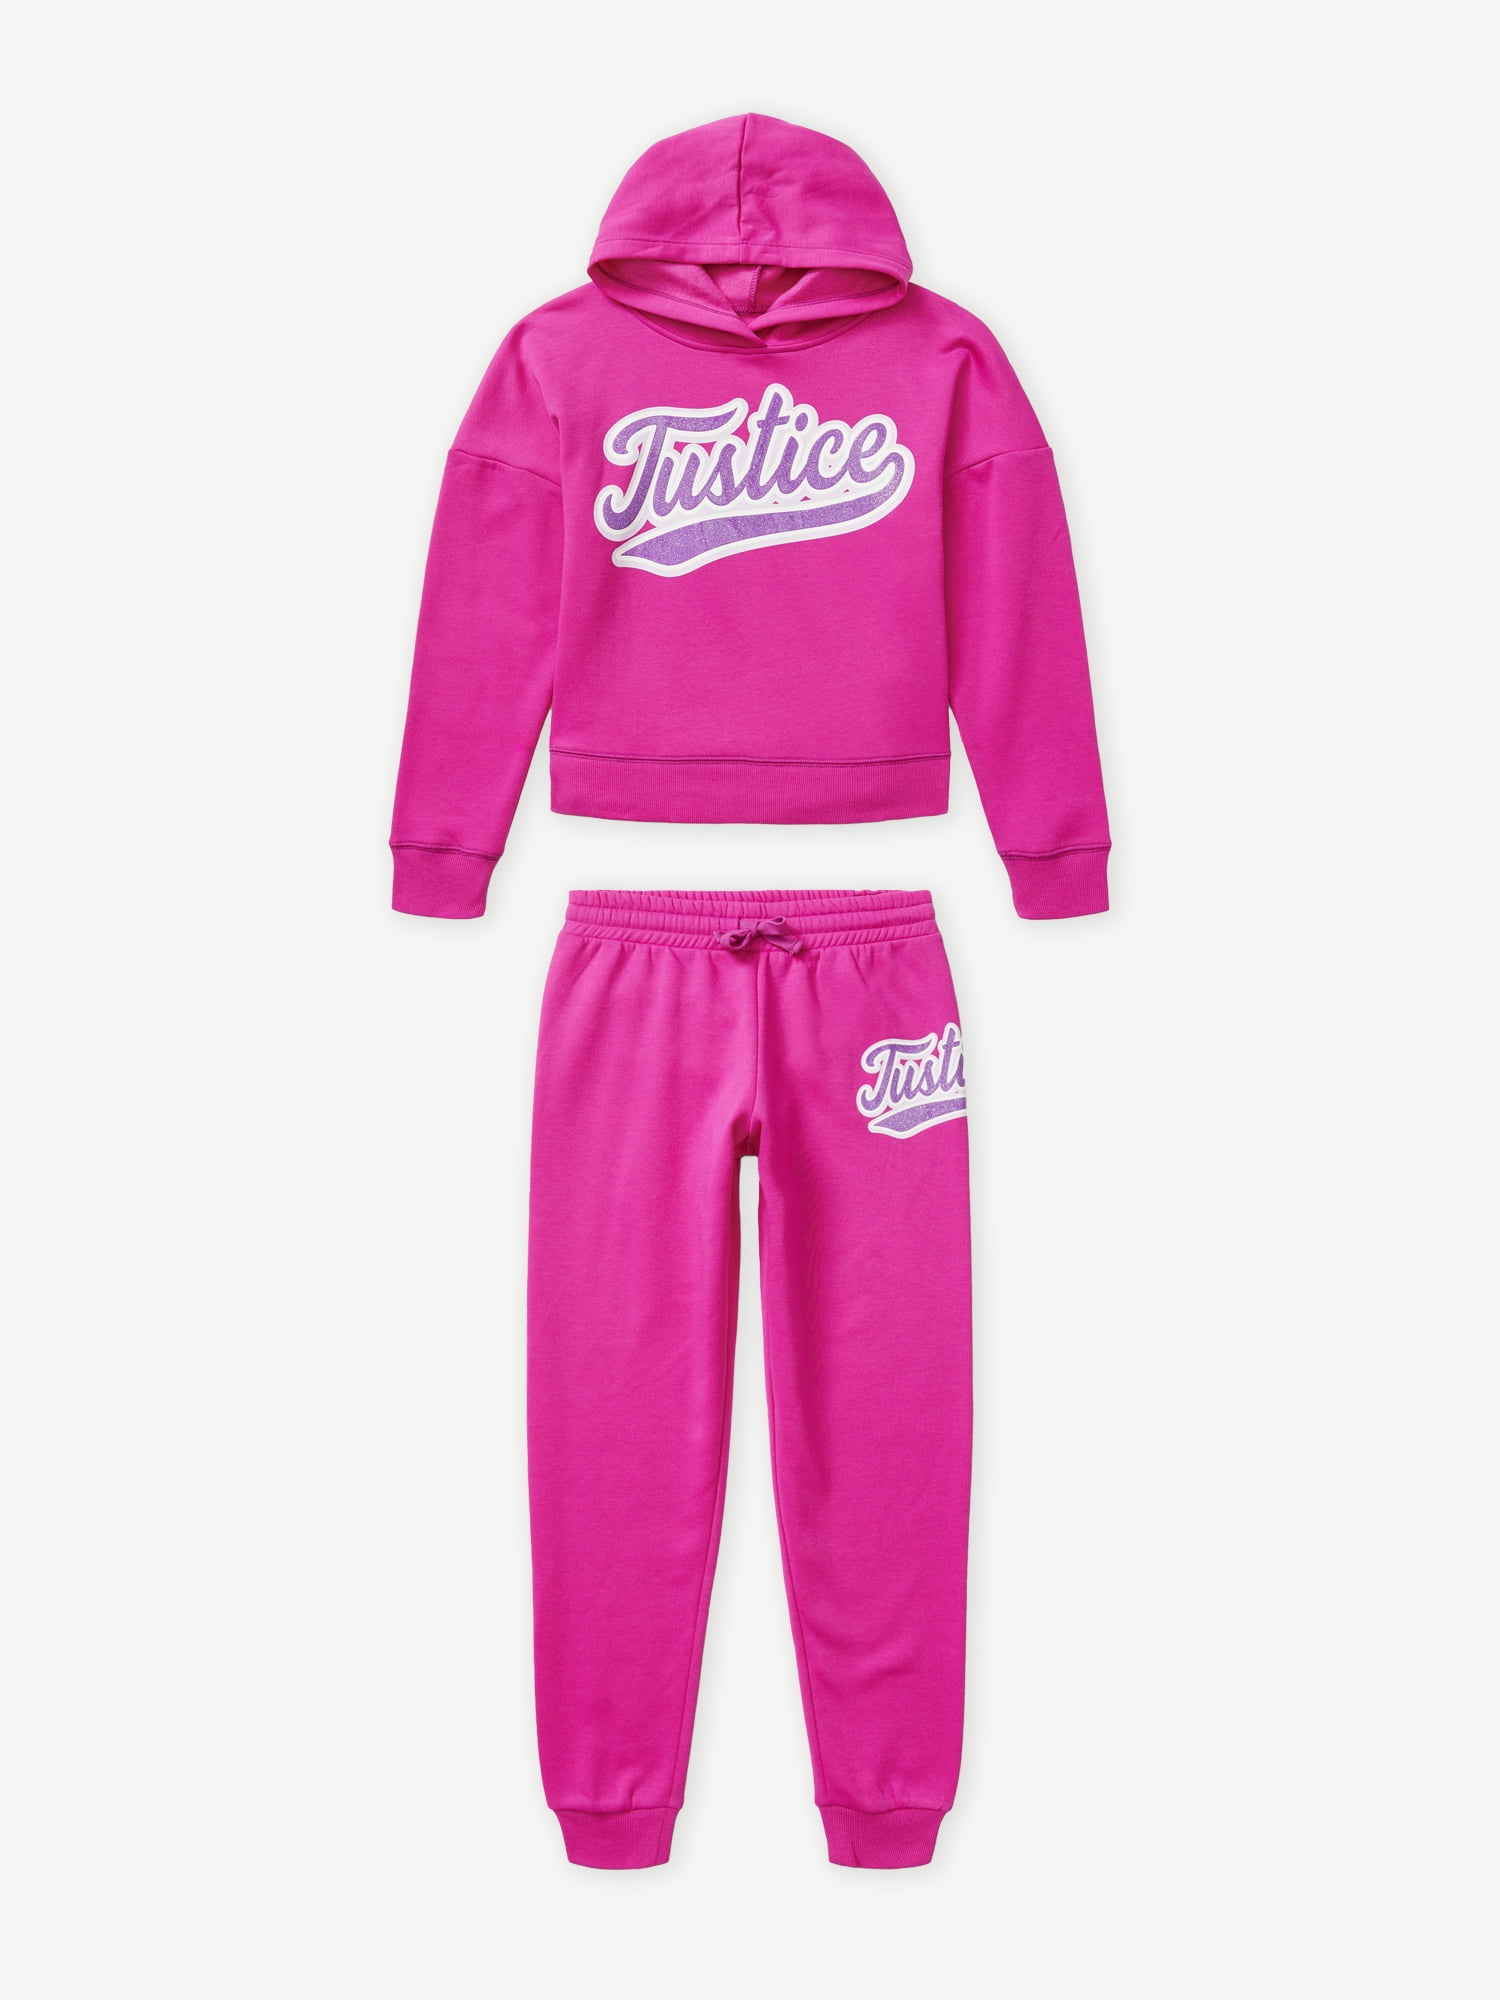 Justice Girls Graphic Hoodie and Jogger, 2-Piece Outfit Set, Sizes XS ...